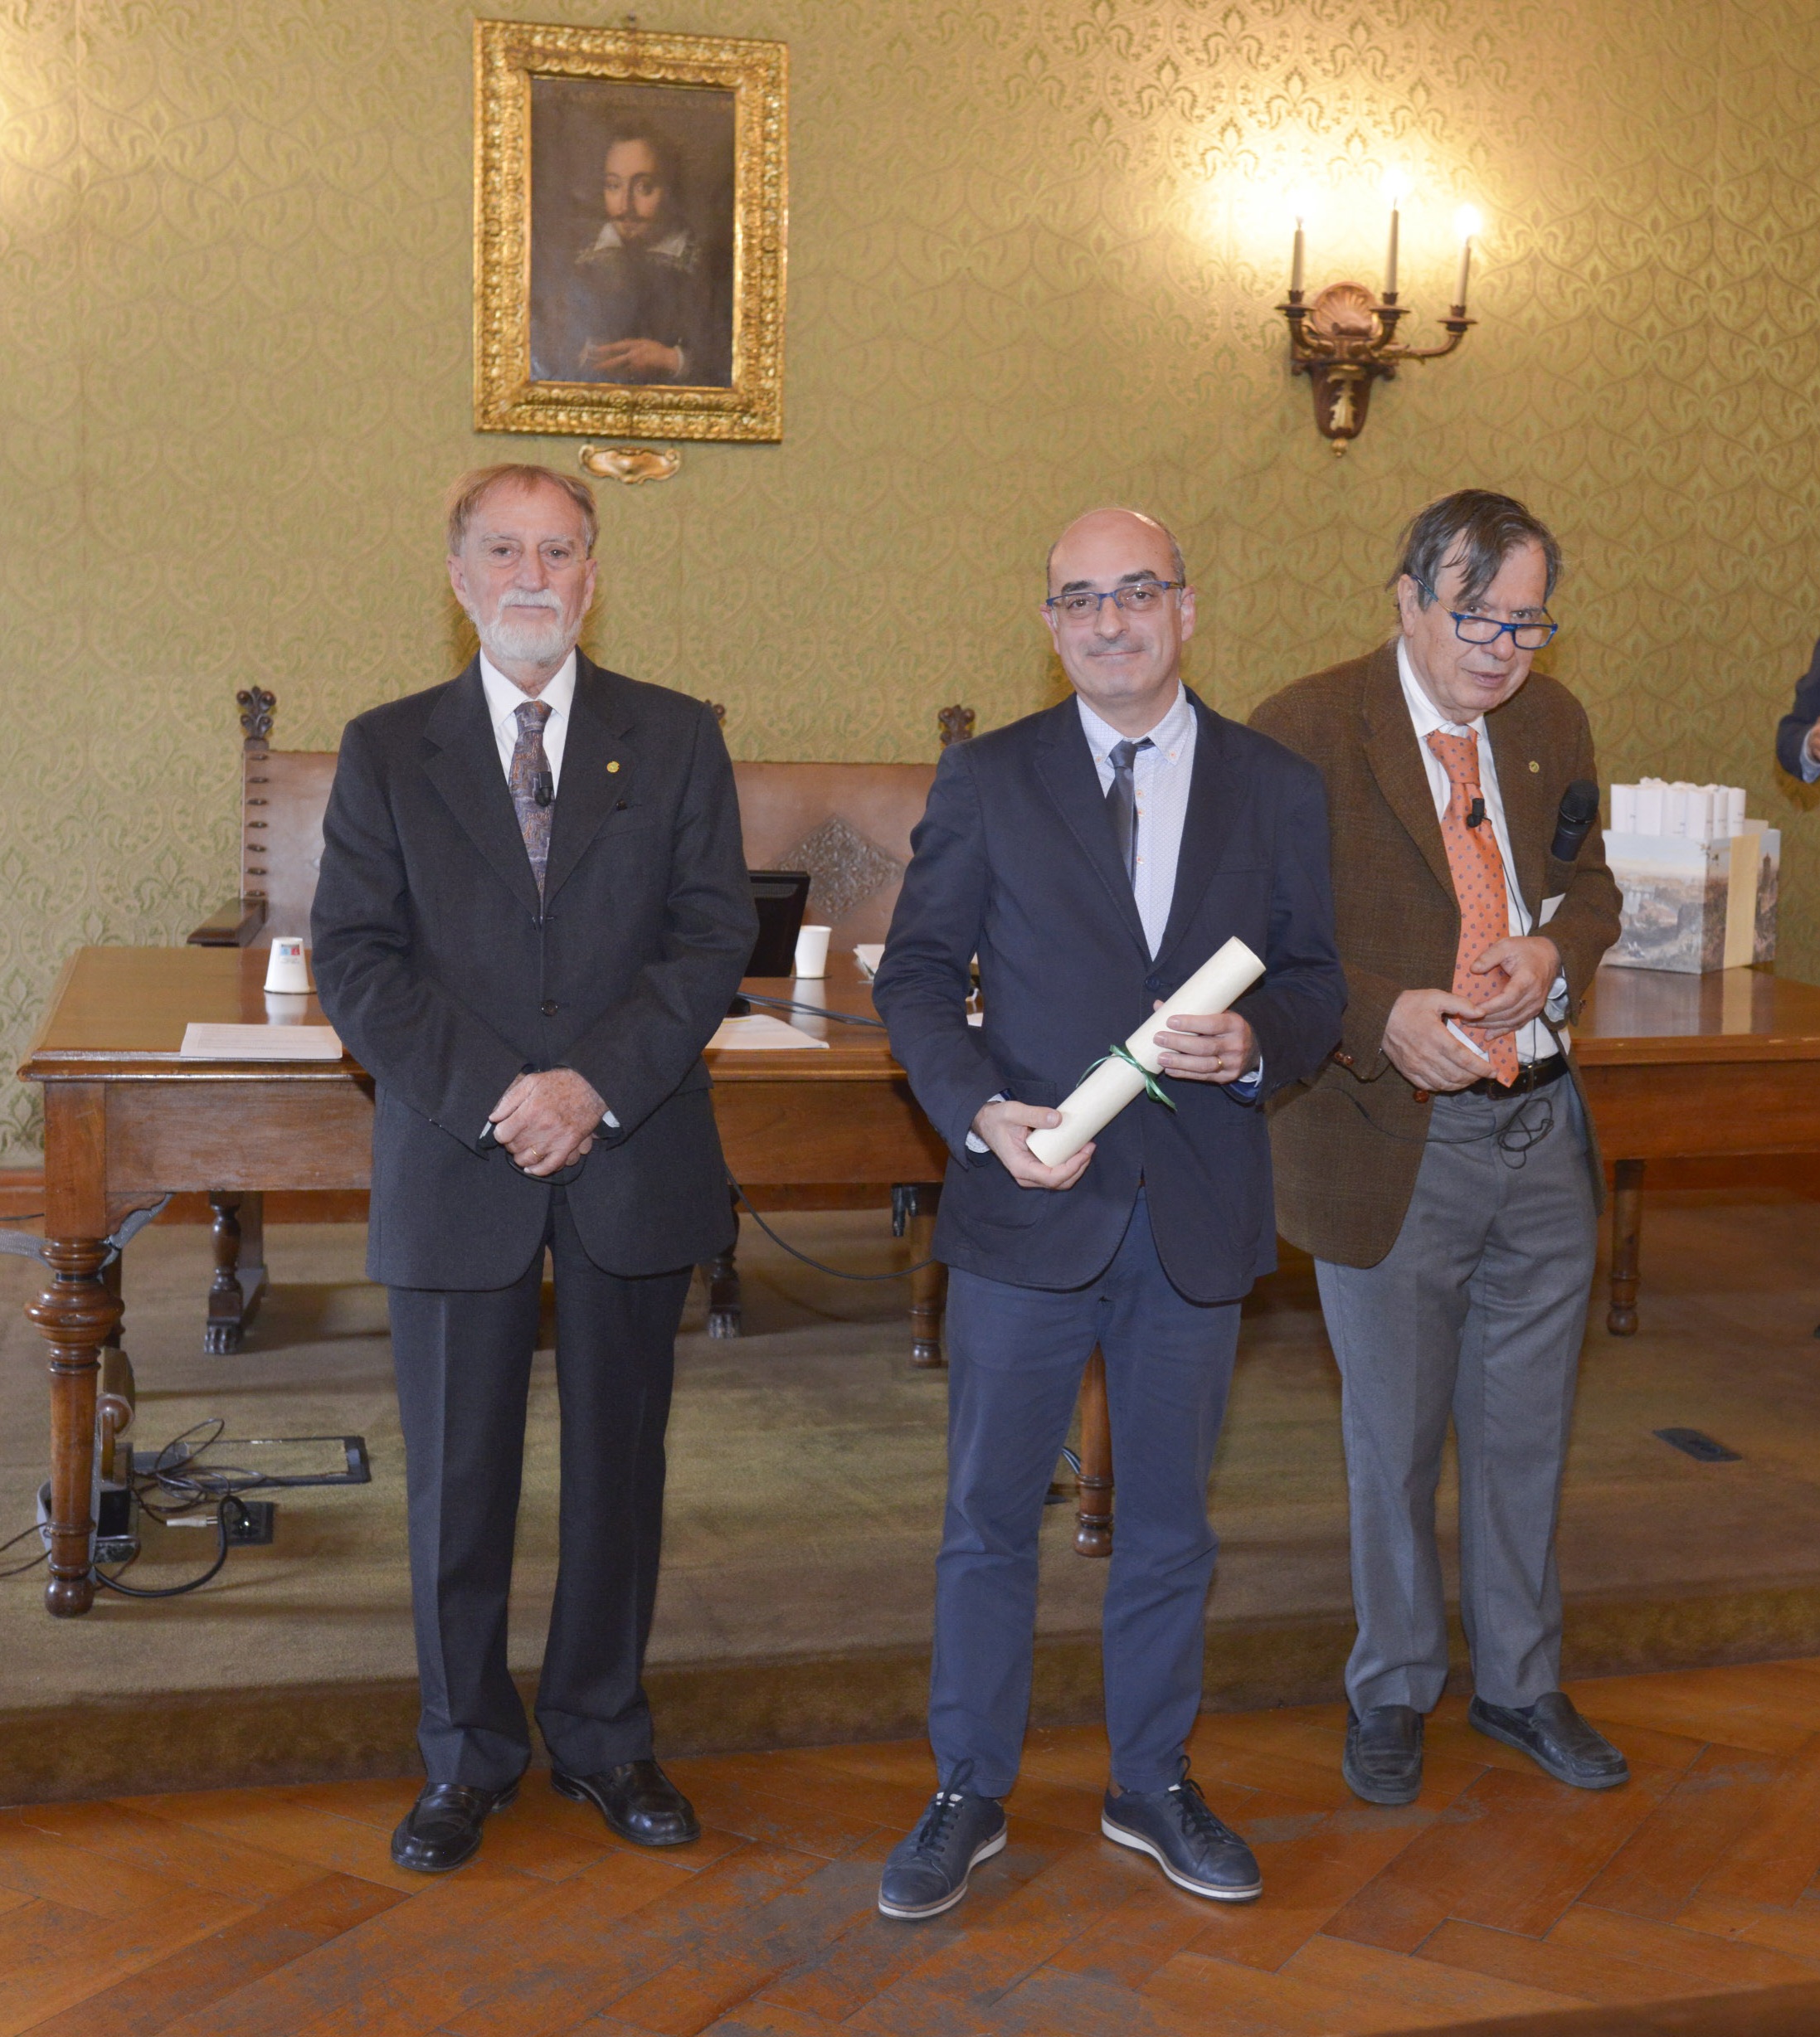 From the left to the right: Roberto Antonelli, president of the Accademia di Lincei, Carles Lalueza-Fox IBE researcher and director of the MCNB, and Giorgio Parisi, nobel of physics. 